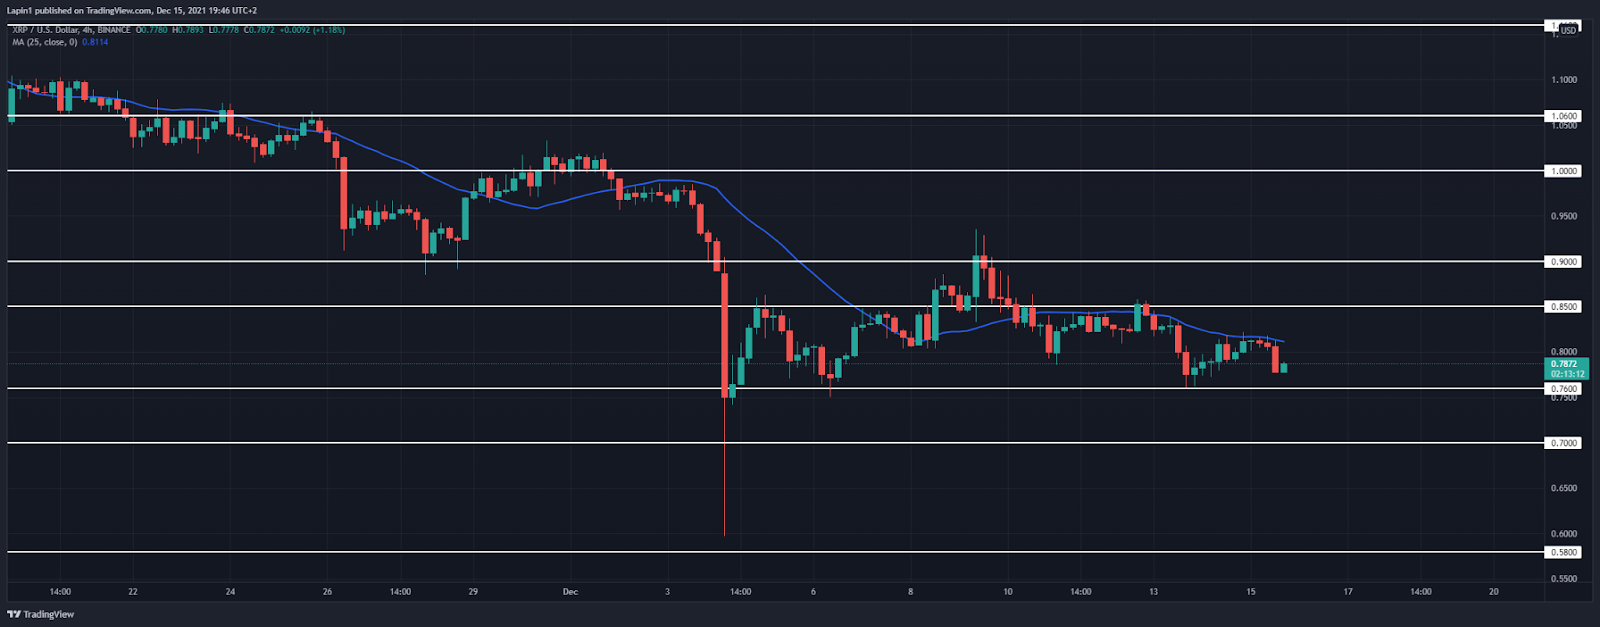 Ripple Price Analysis: XRP posts another lower high at $0.82, another drop incoming?